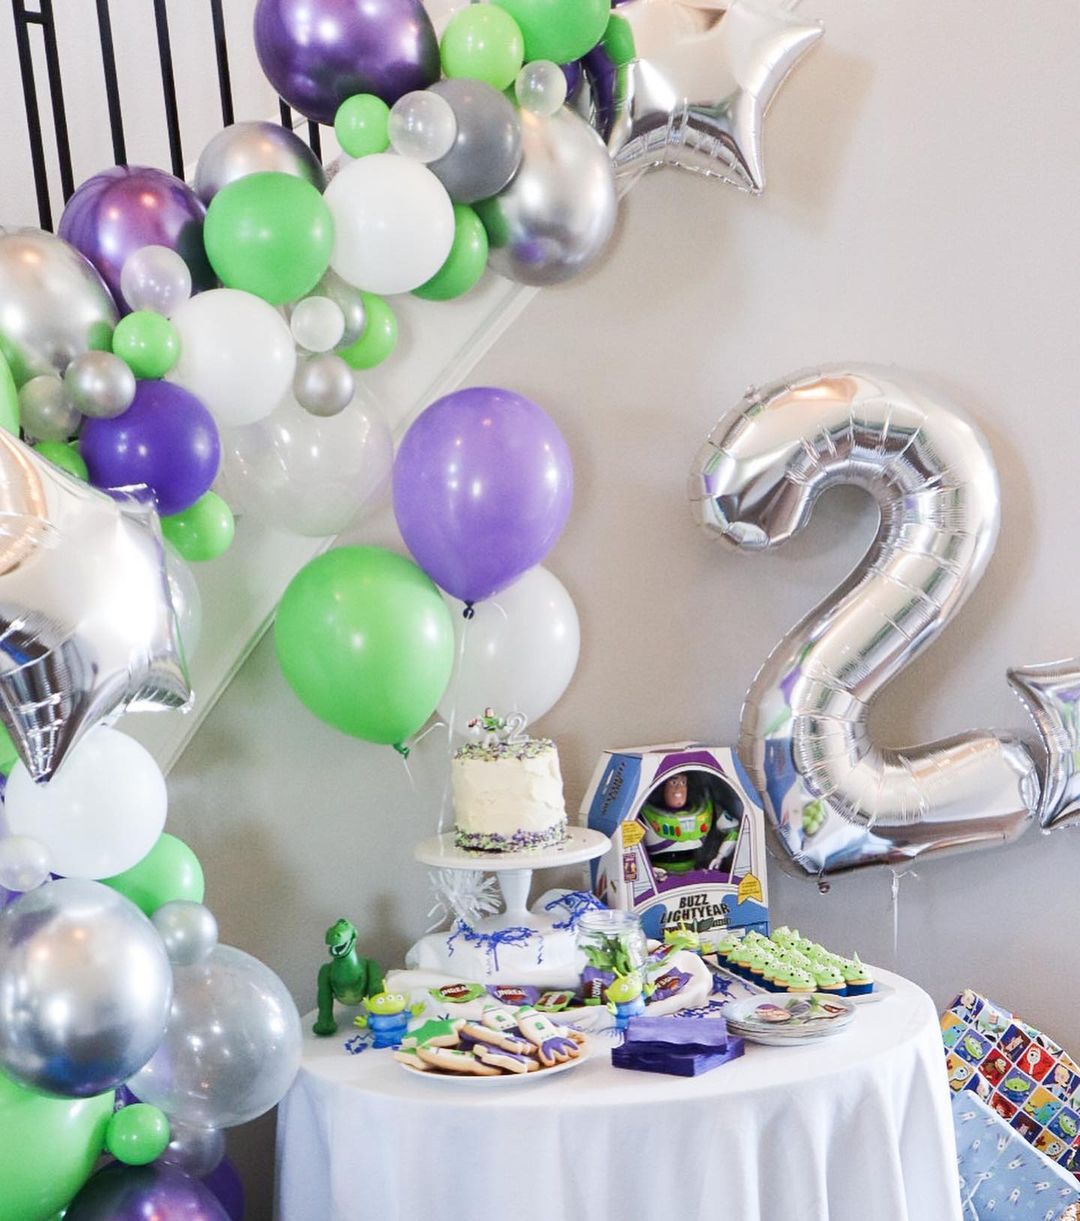 70 Of The Best 2nd Birthday Party Ideas For Boys & Girls - Kids Love WHAT